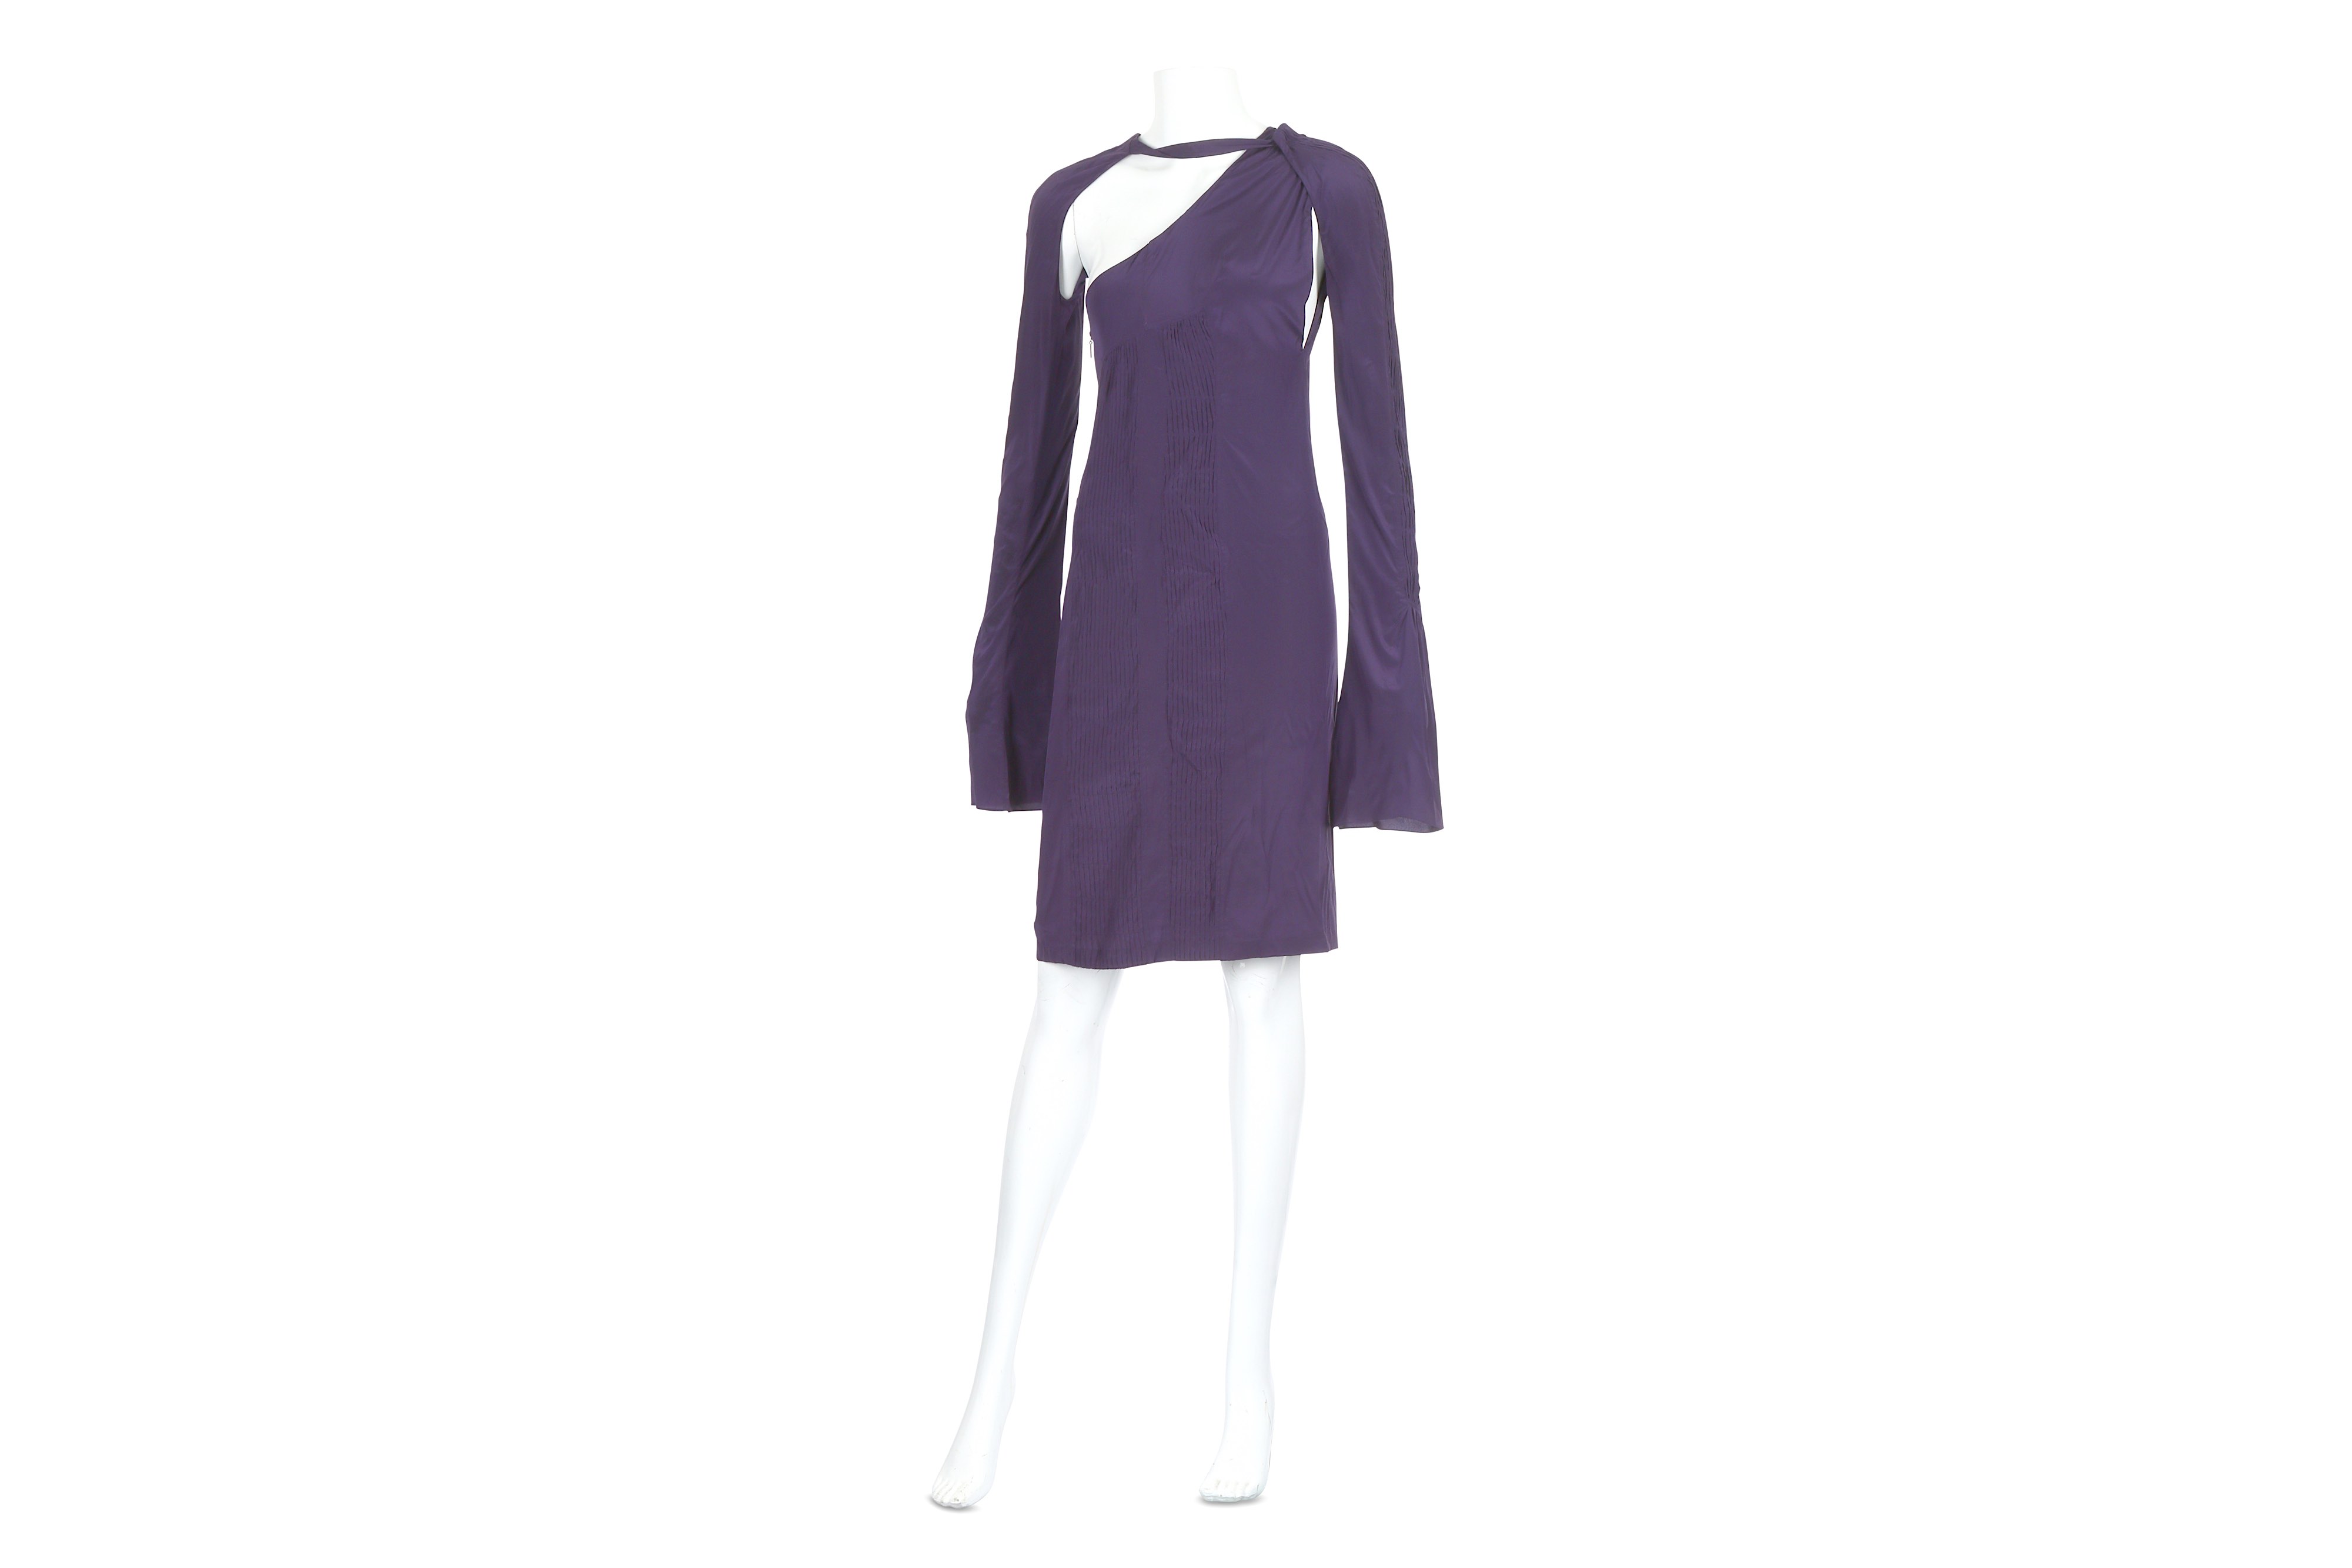 Tom Ford for Gucci Purple Silk Dress - size 40 - Image 2 of 7